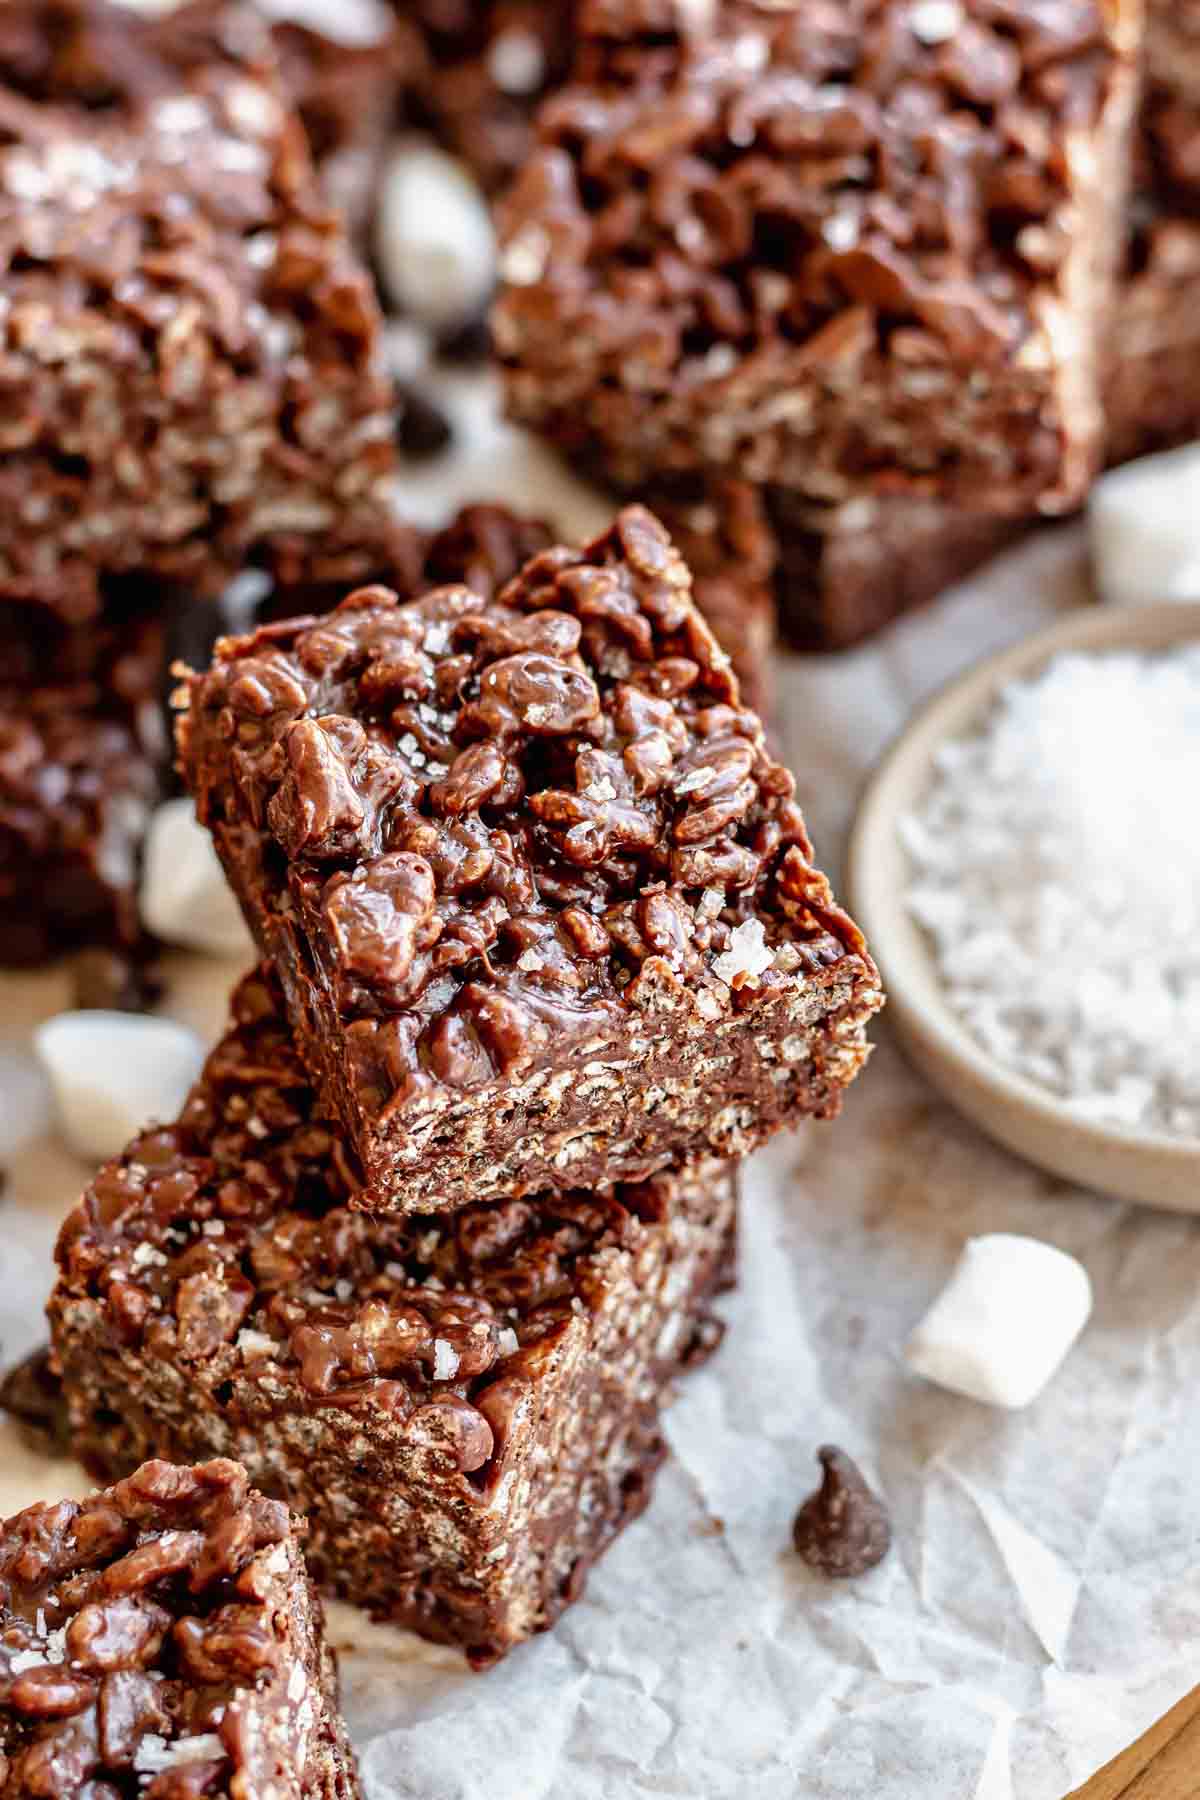 Chocolate Rice Krispie treats stacked on each other.